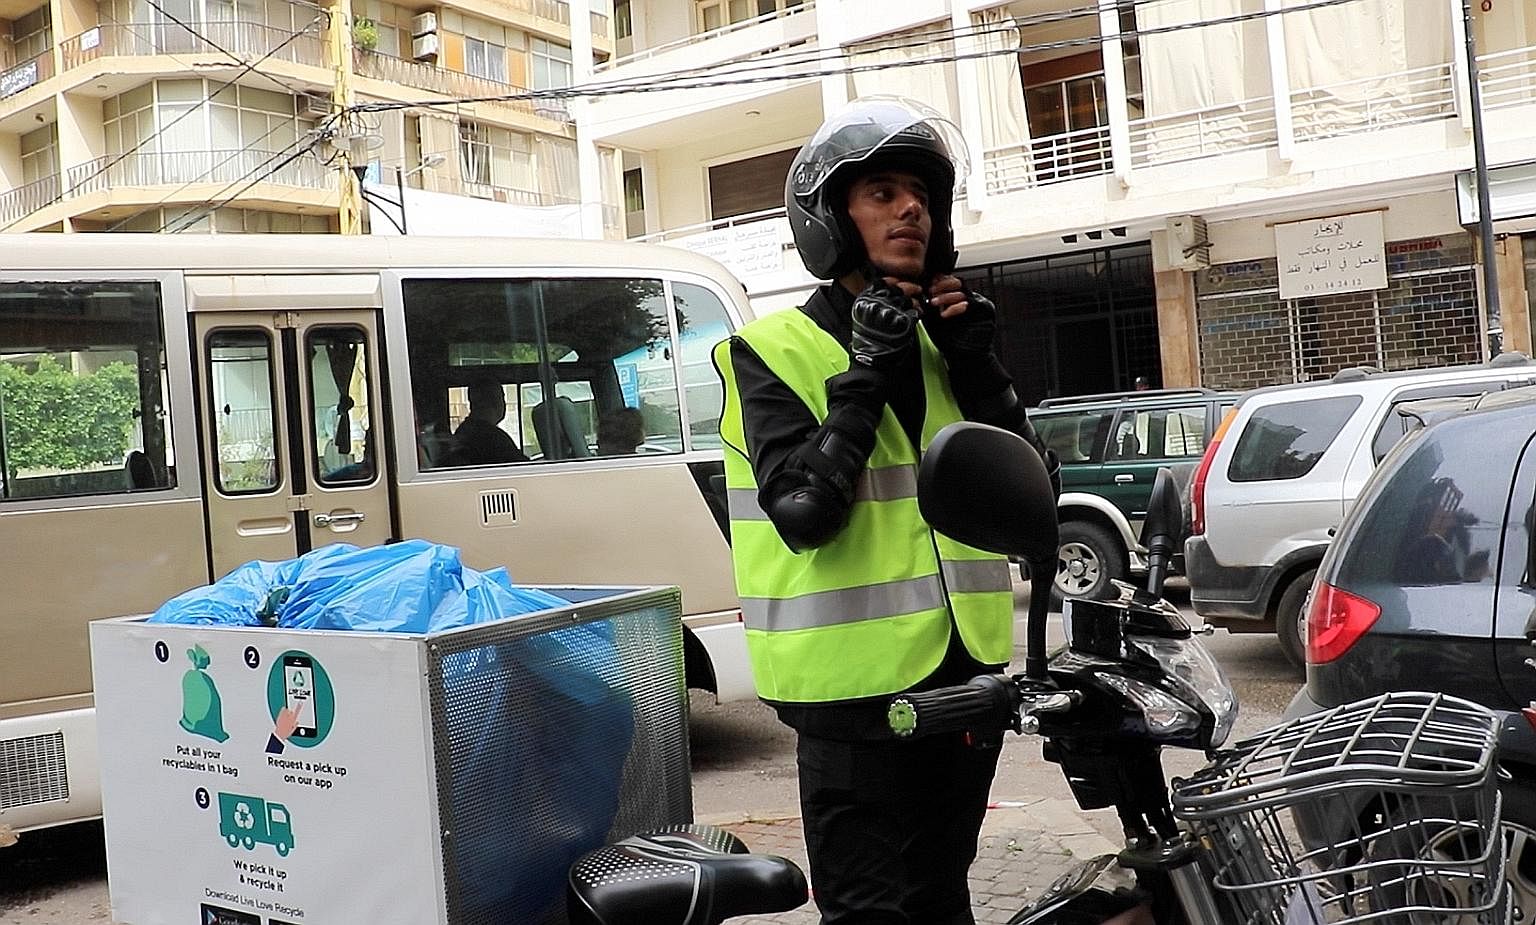 Syrian refugee Ibrahim Habach is one of 400 Live Love Recycle's e-bike couriers who collect recyclable waste in Beirut.